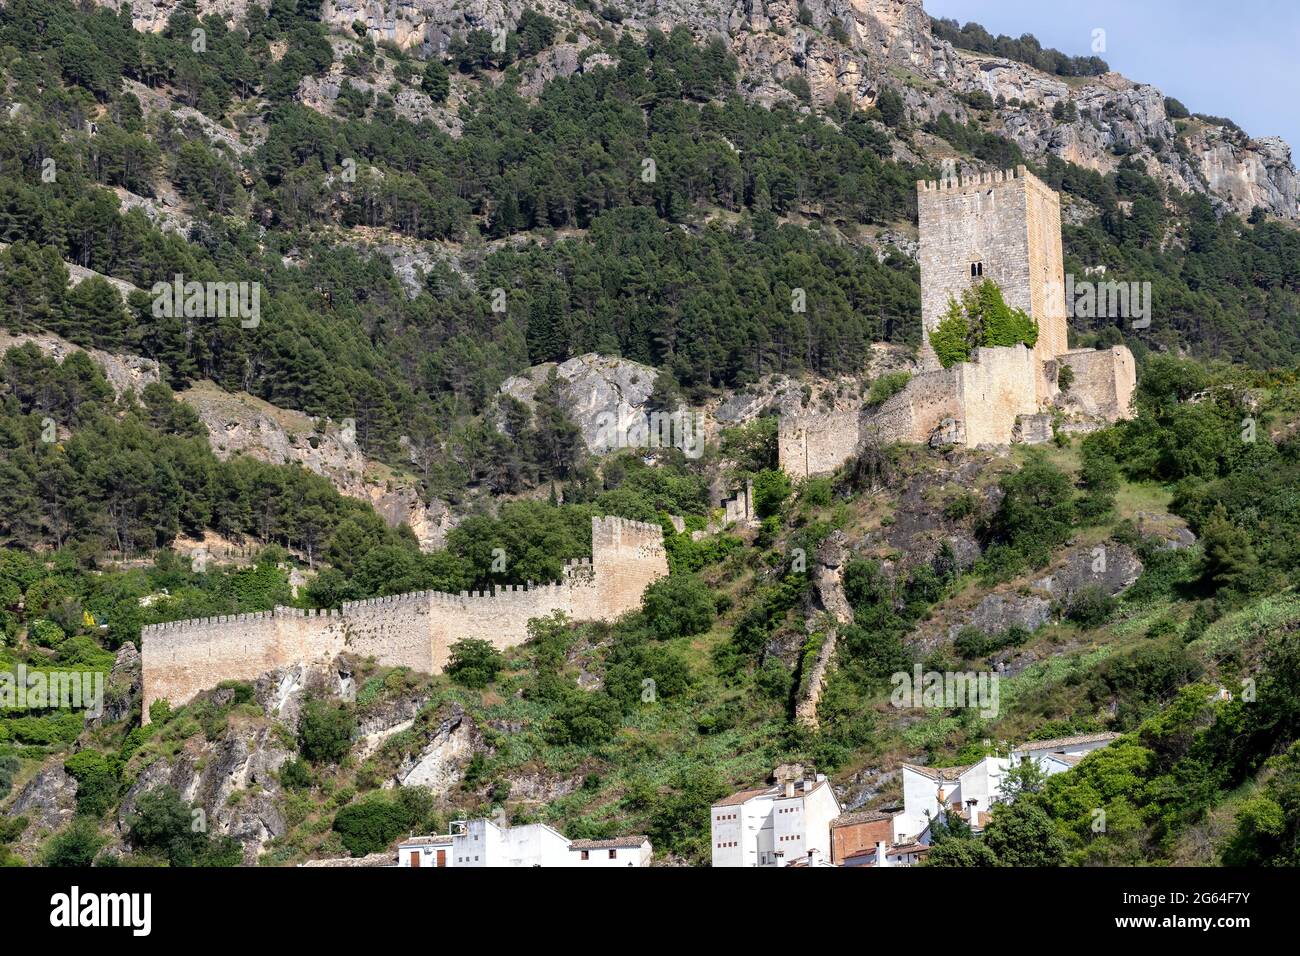 The castle of La Yedra, old enclave of defensive origin located in the Spanish municipality of Cazorla. Located in the lower part of the Salvatierra h Stock Photo